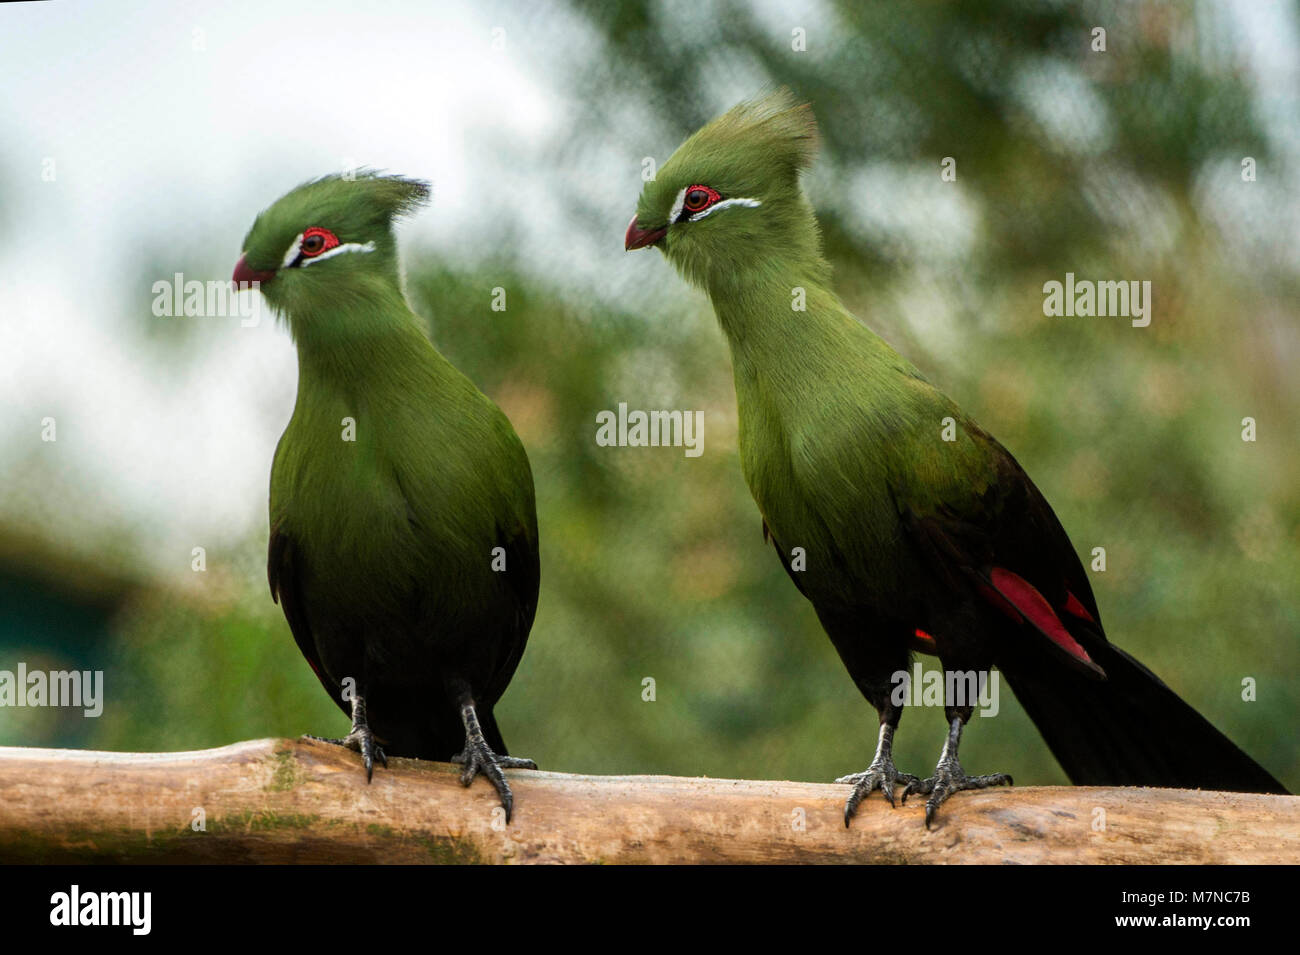 West African Green's Turaco (Tauraco persa) ritratto Foto Stock